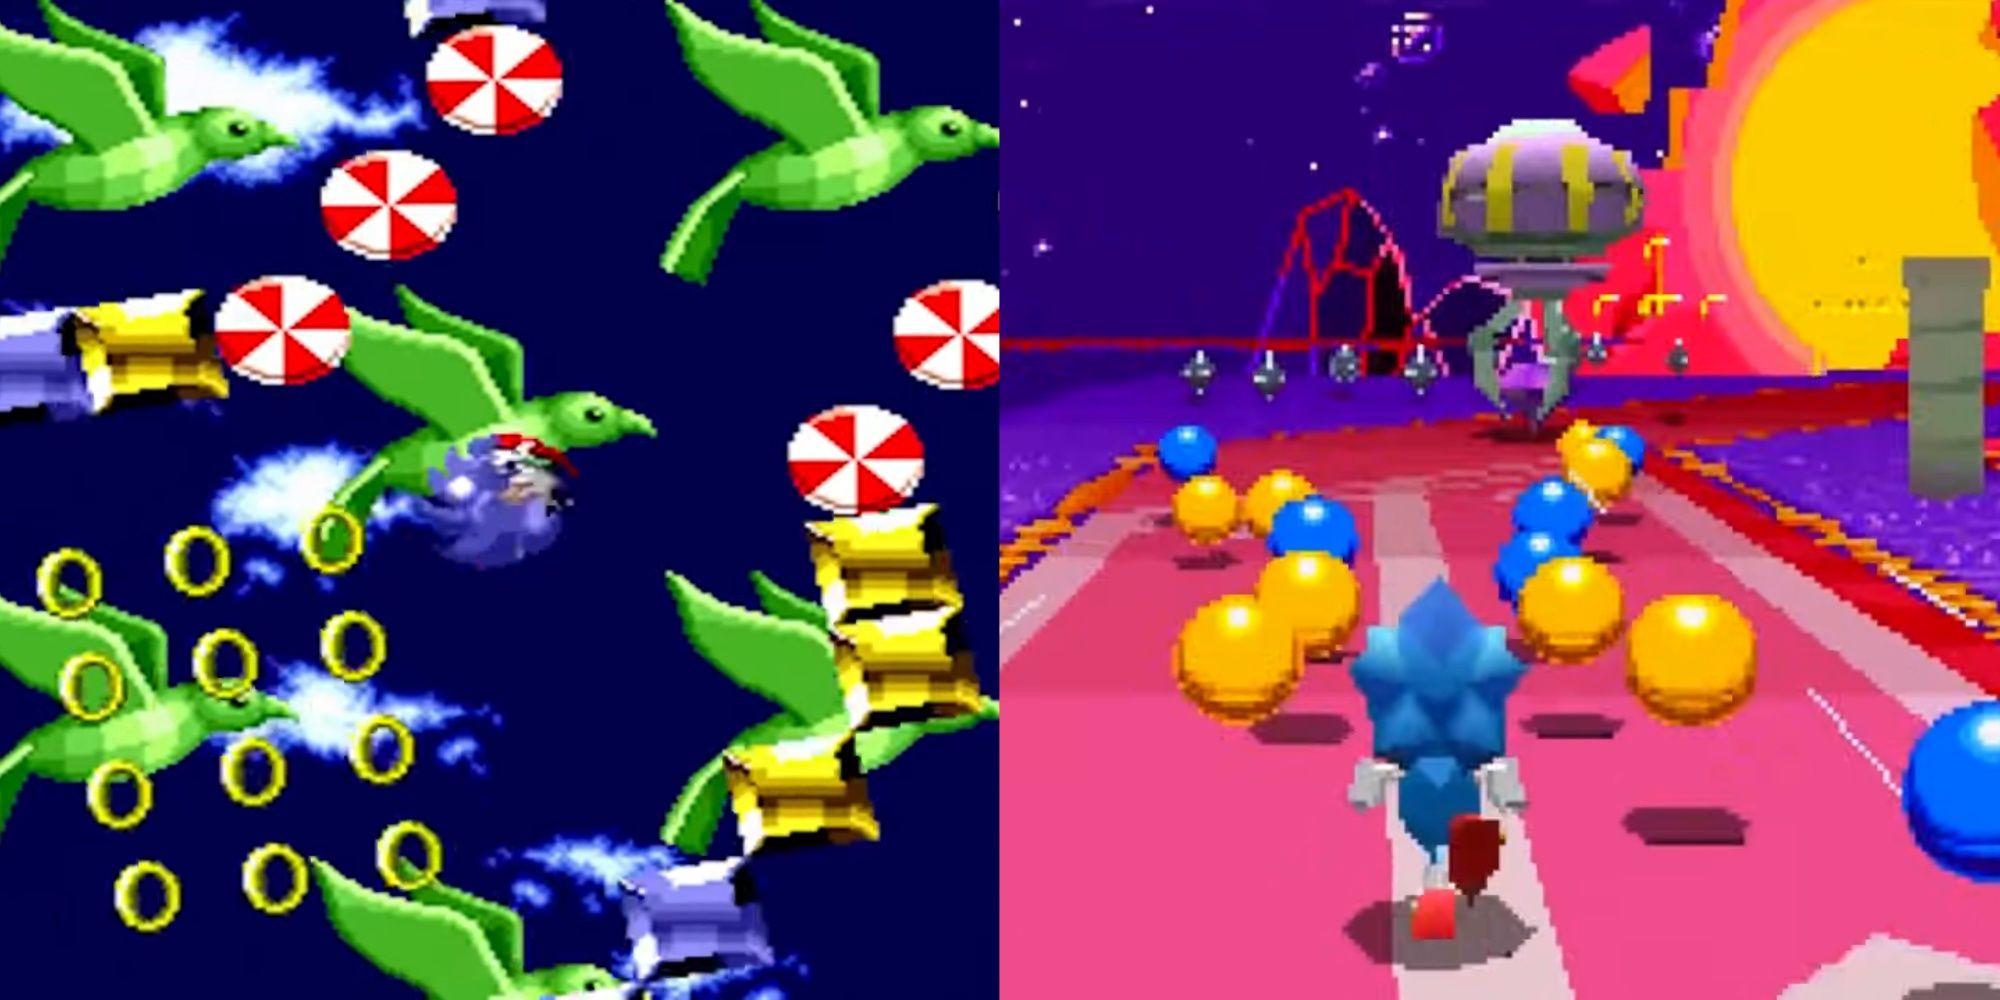 Sonic going through the special stage in Sonic 1 and Sonic Mania.